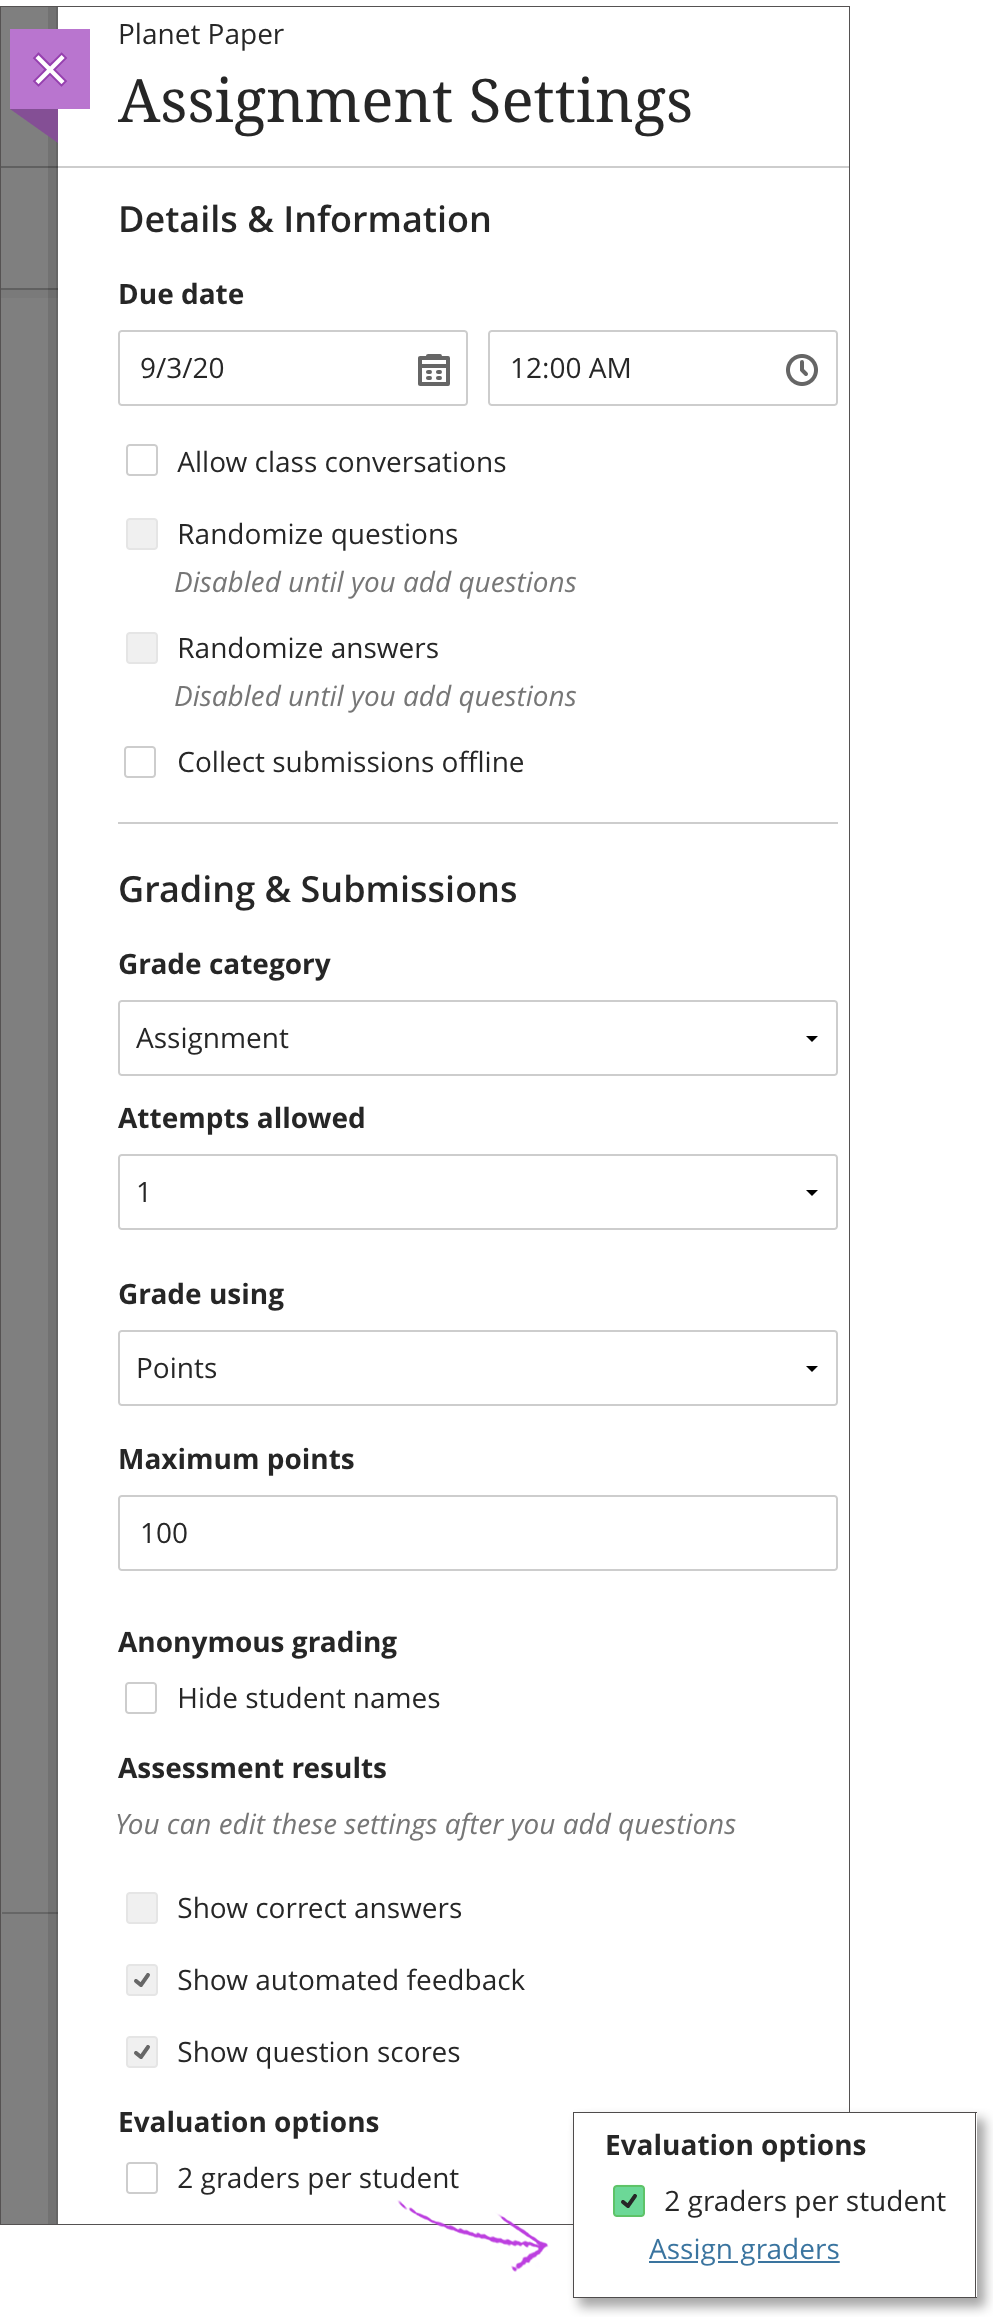 The Assignment settings panel is open with the "2 graders per student" checkbox selected and the Evaluation options section pointed and highlighted.